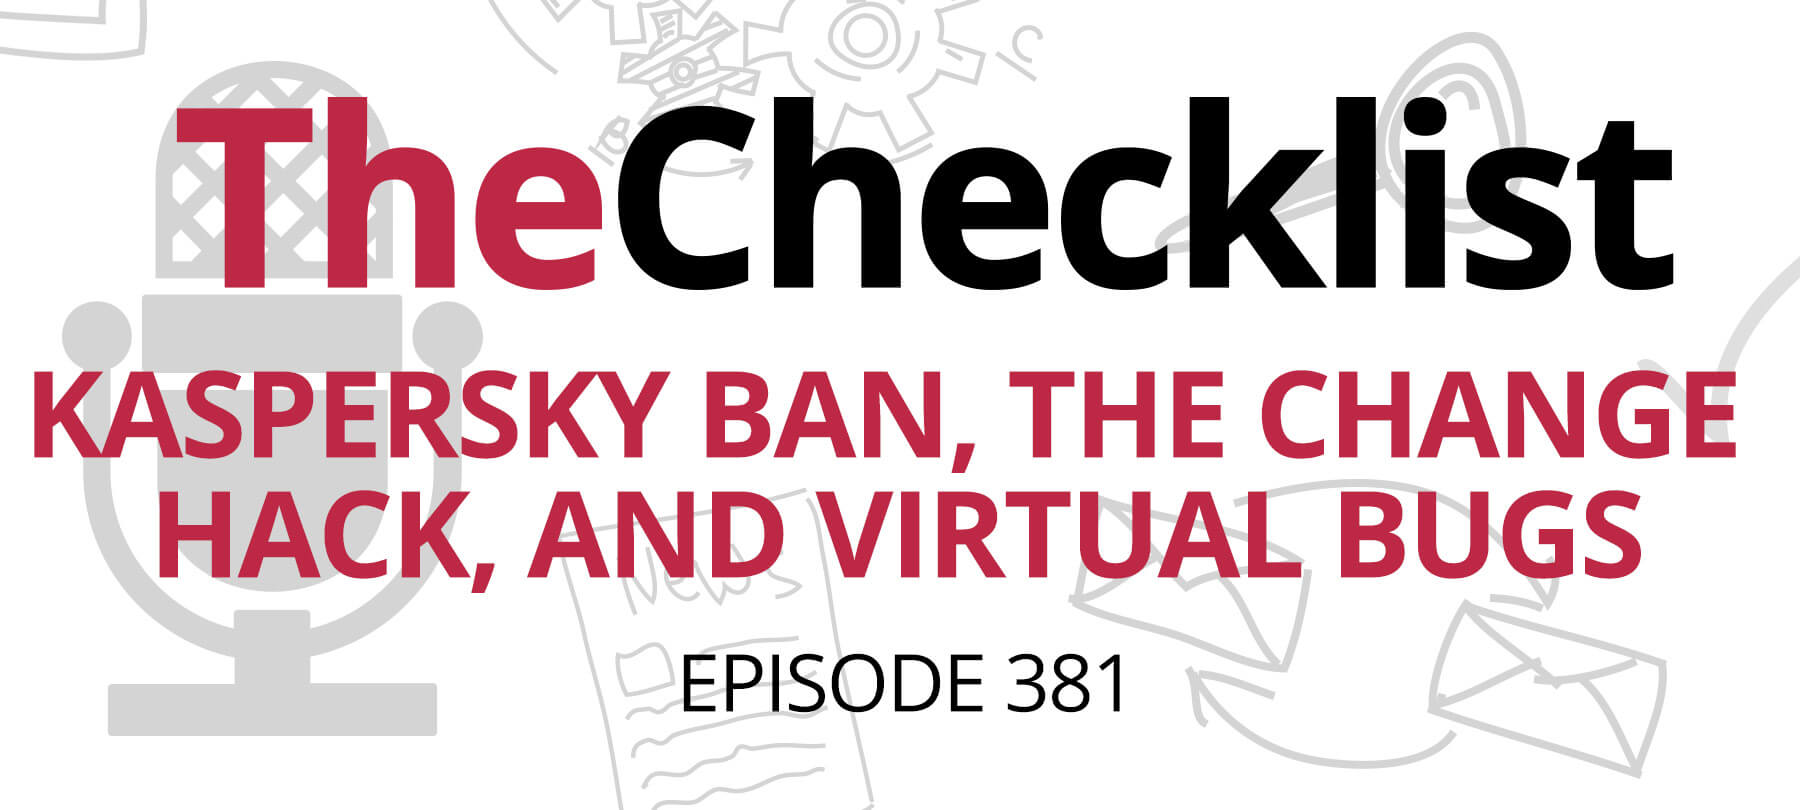 Checklist 381 header image: Kaspersky Ban, the Change Hack, and Virtual Bugs written in red text